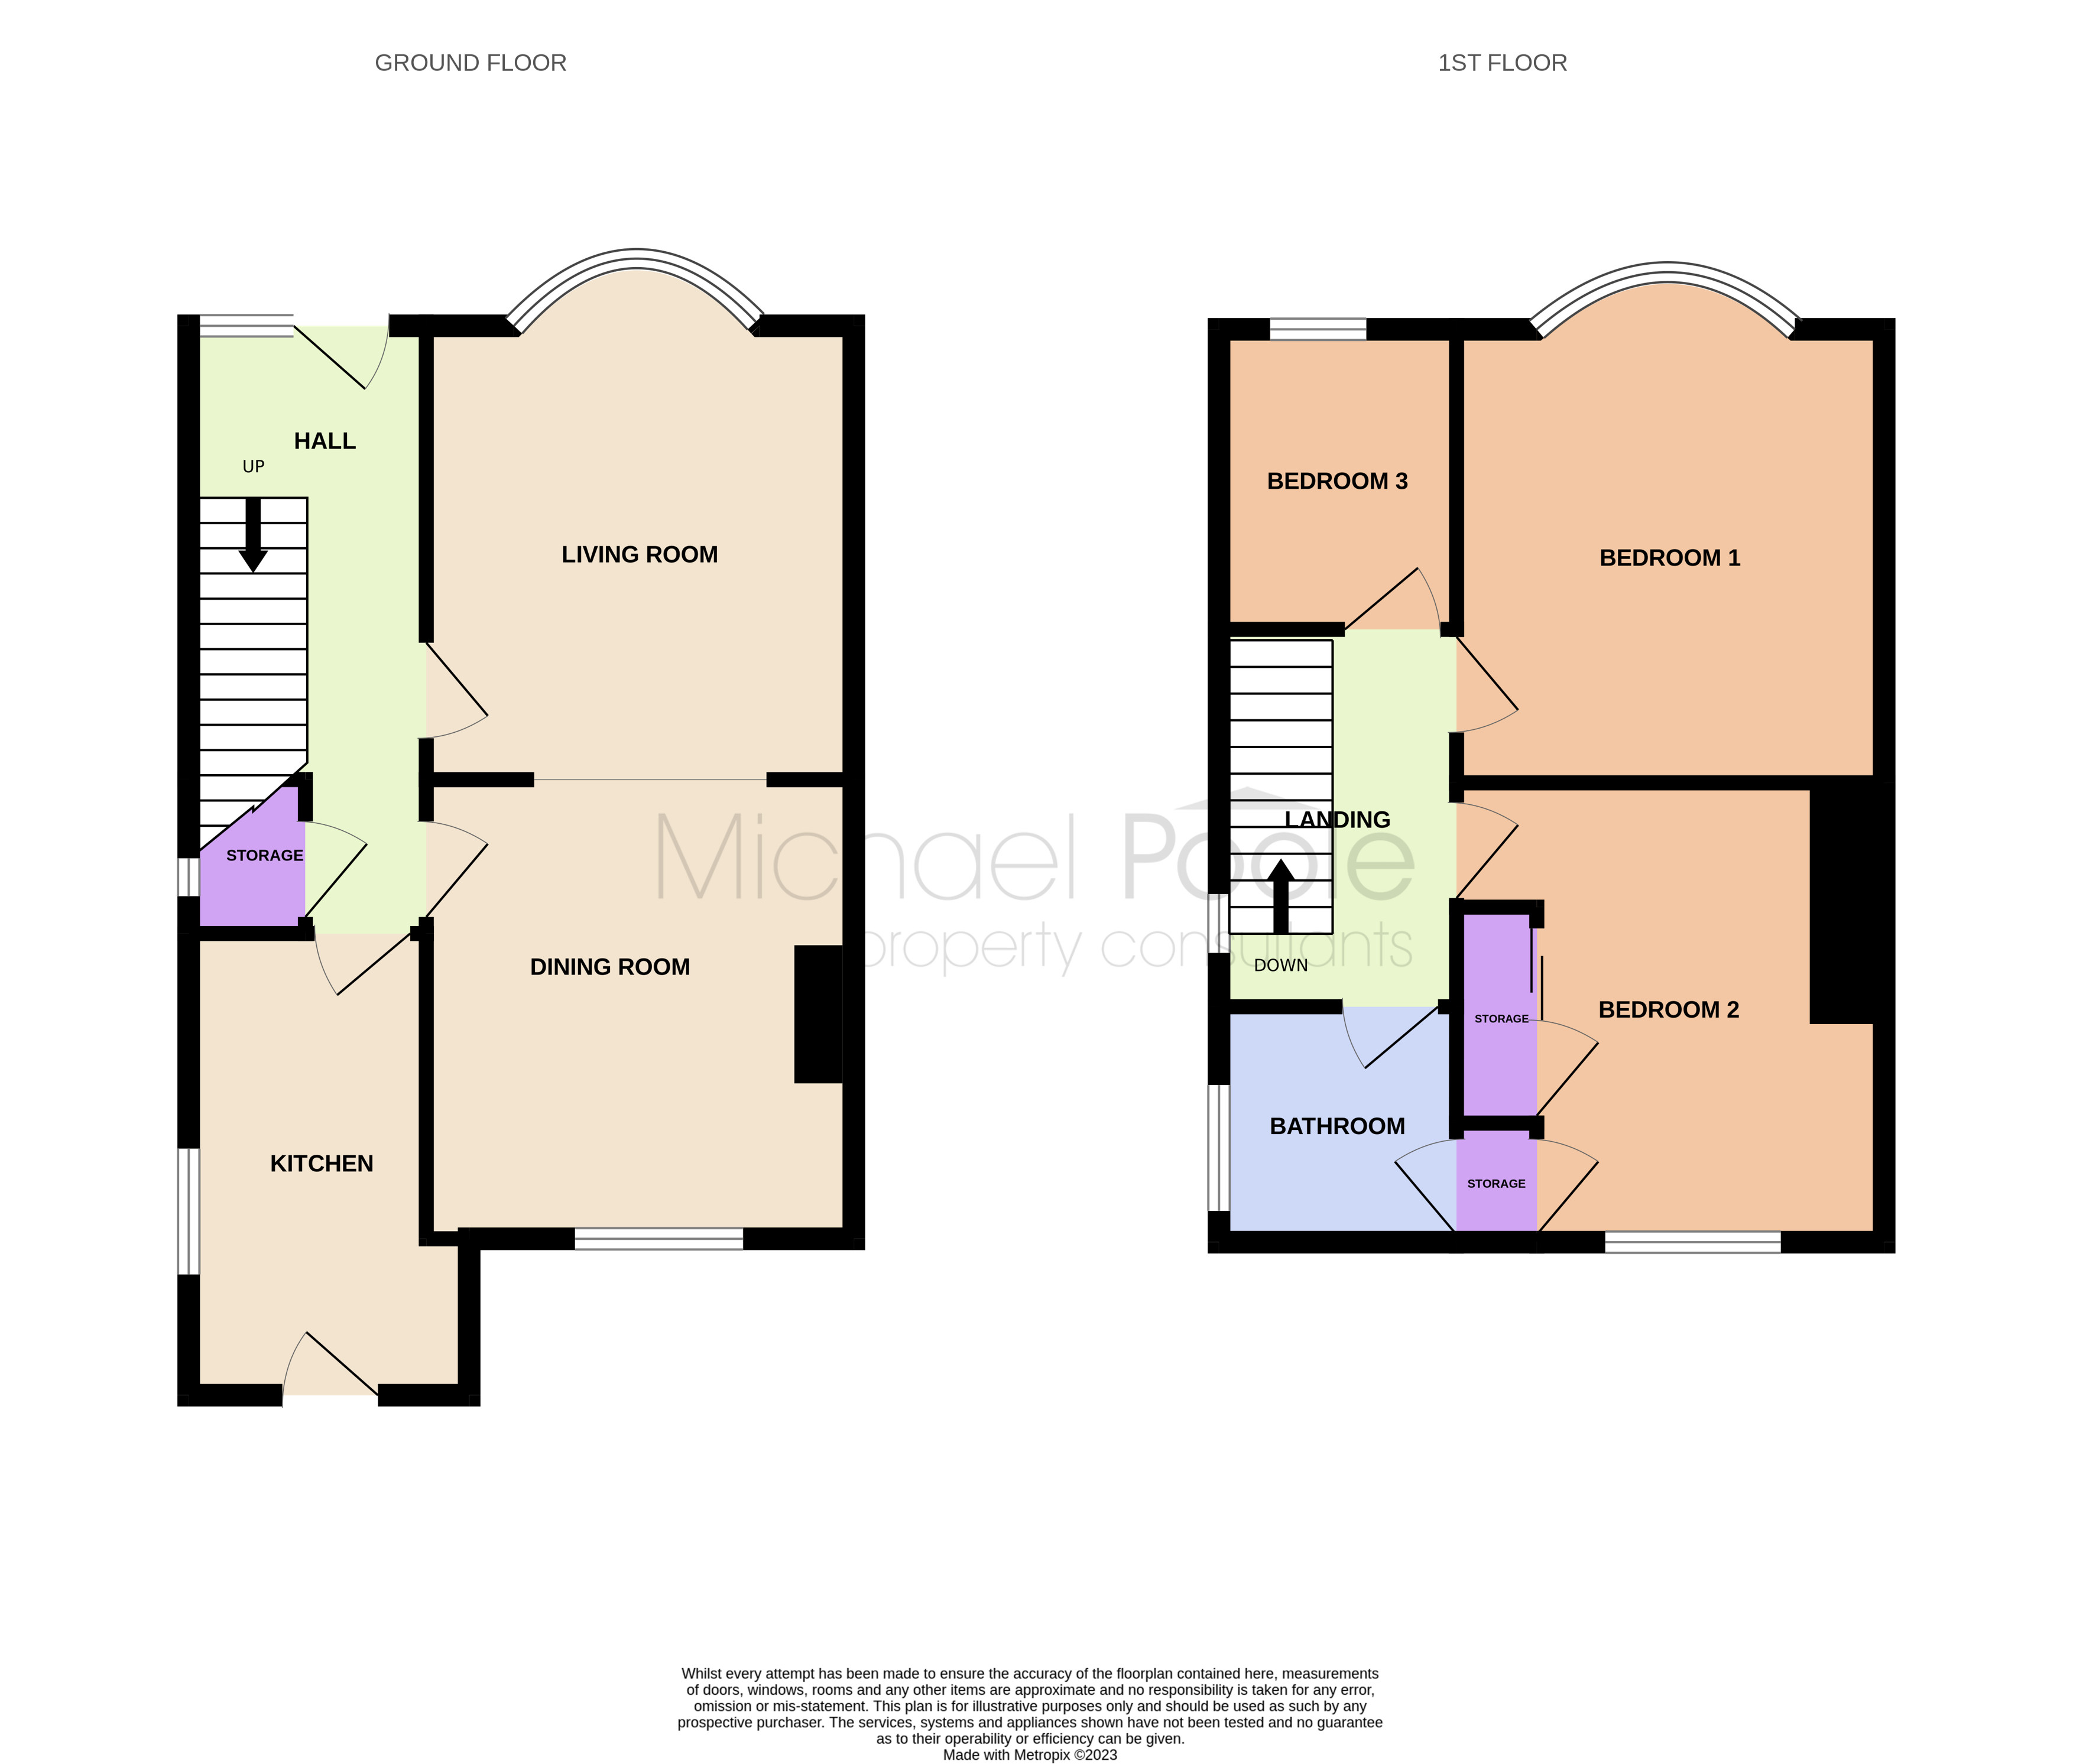 3 bed house for sale in Kinloch Road, Normanby - Property floorplan